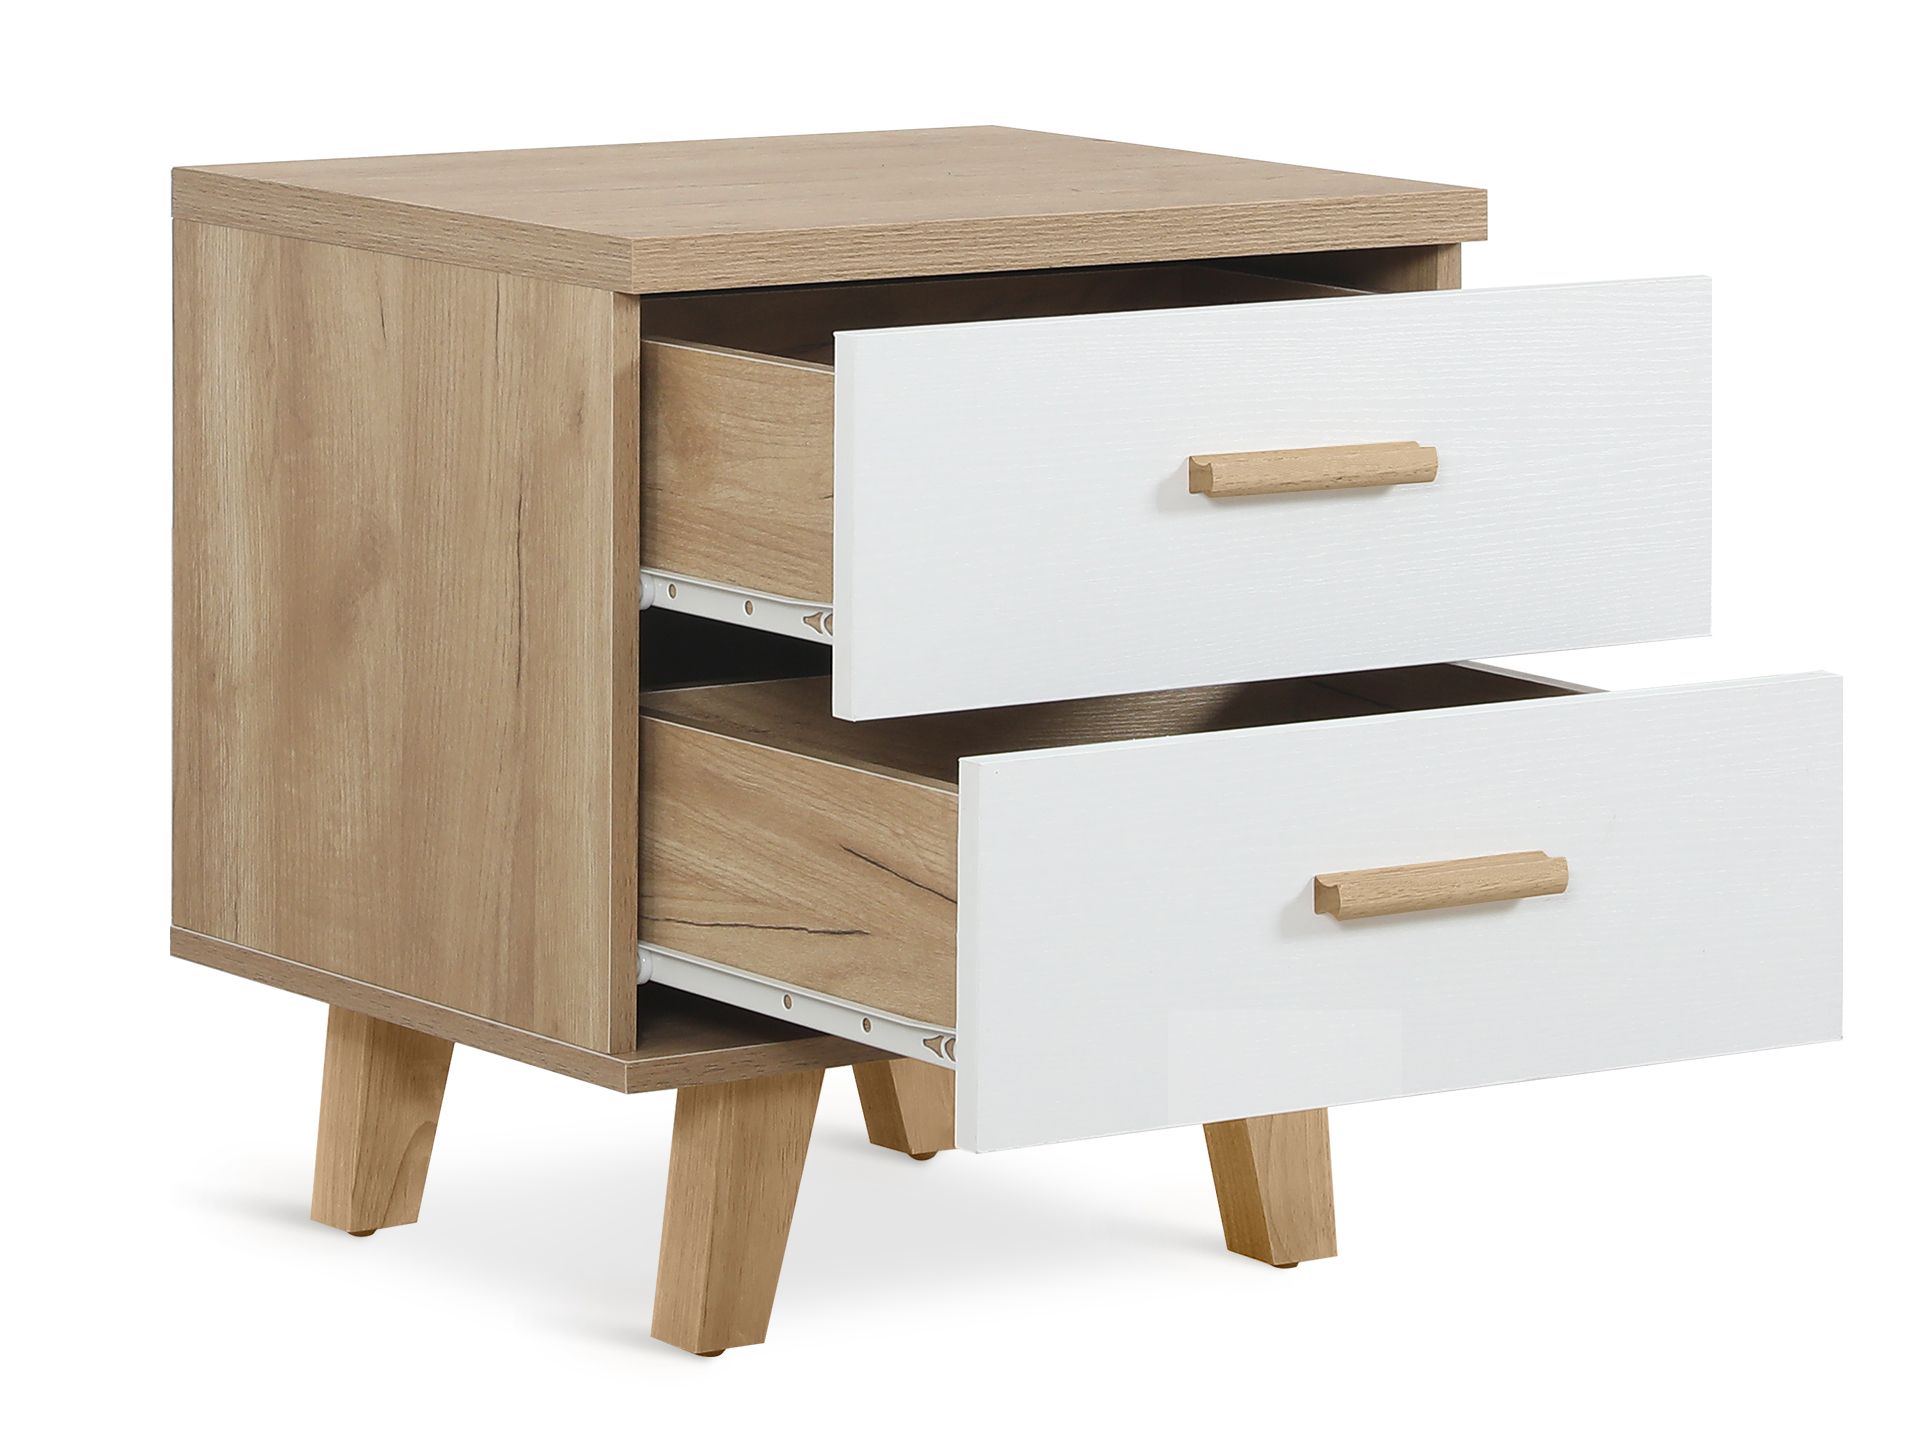 Alton Bedroom Storage Package with Tallboy 6 Drawers - Natural + White